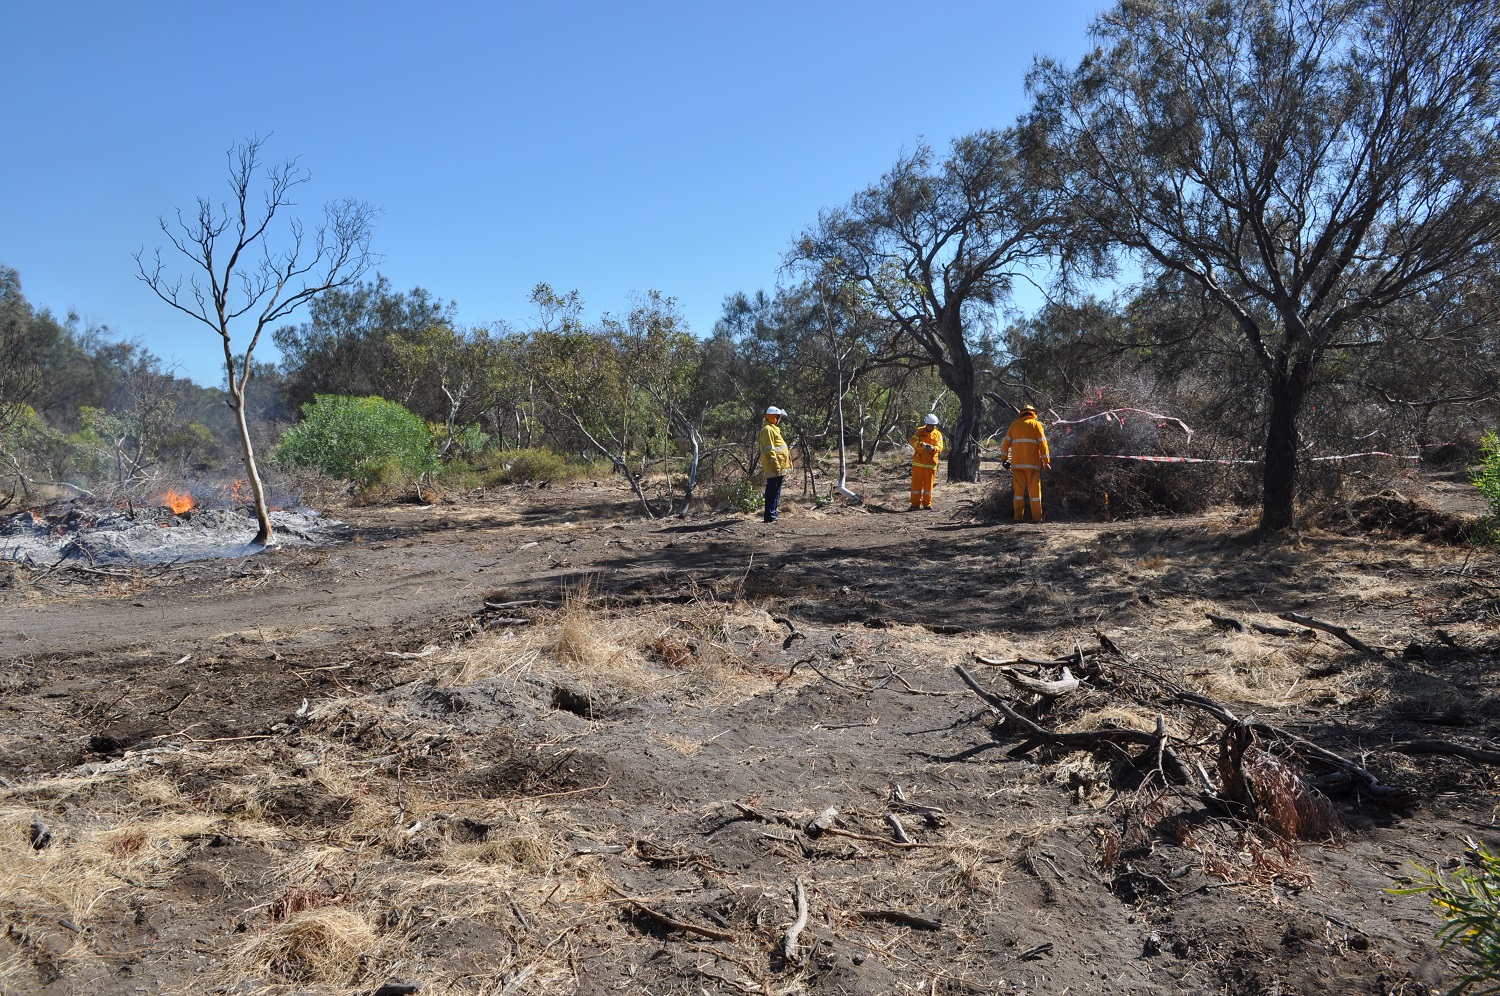 Volunteer Firefighters conducting a controlled burn of piles of African boxthorn at the ‘Rum Jungle’.